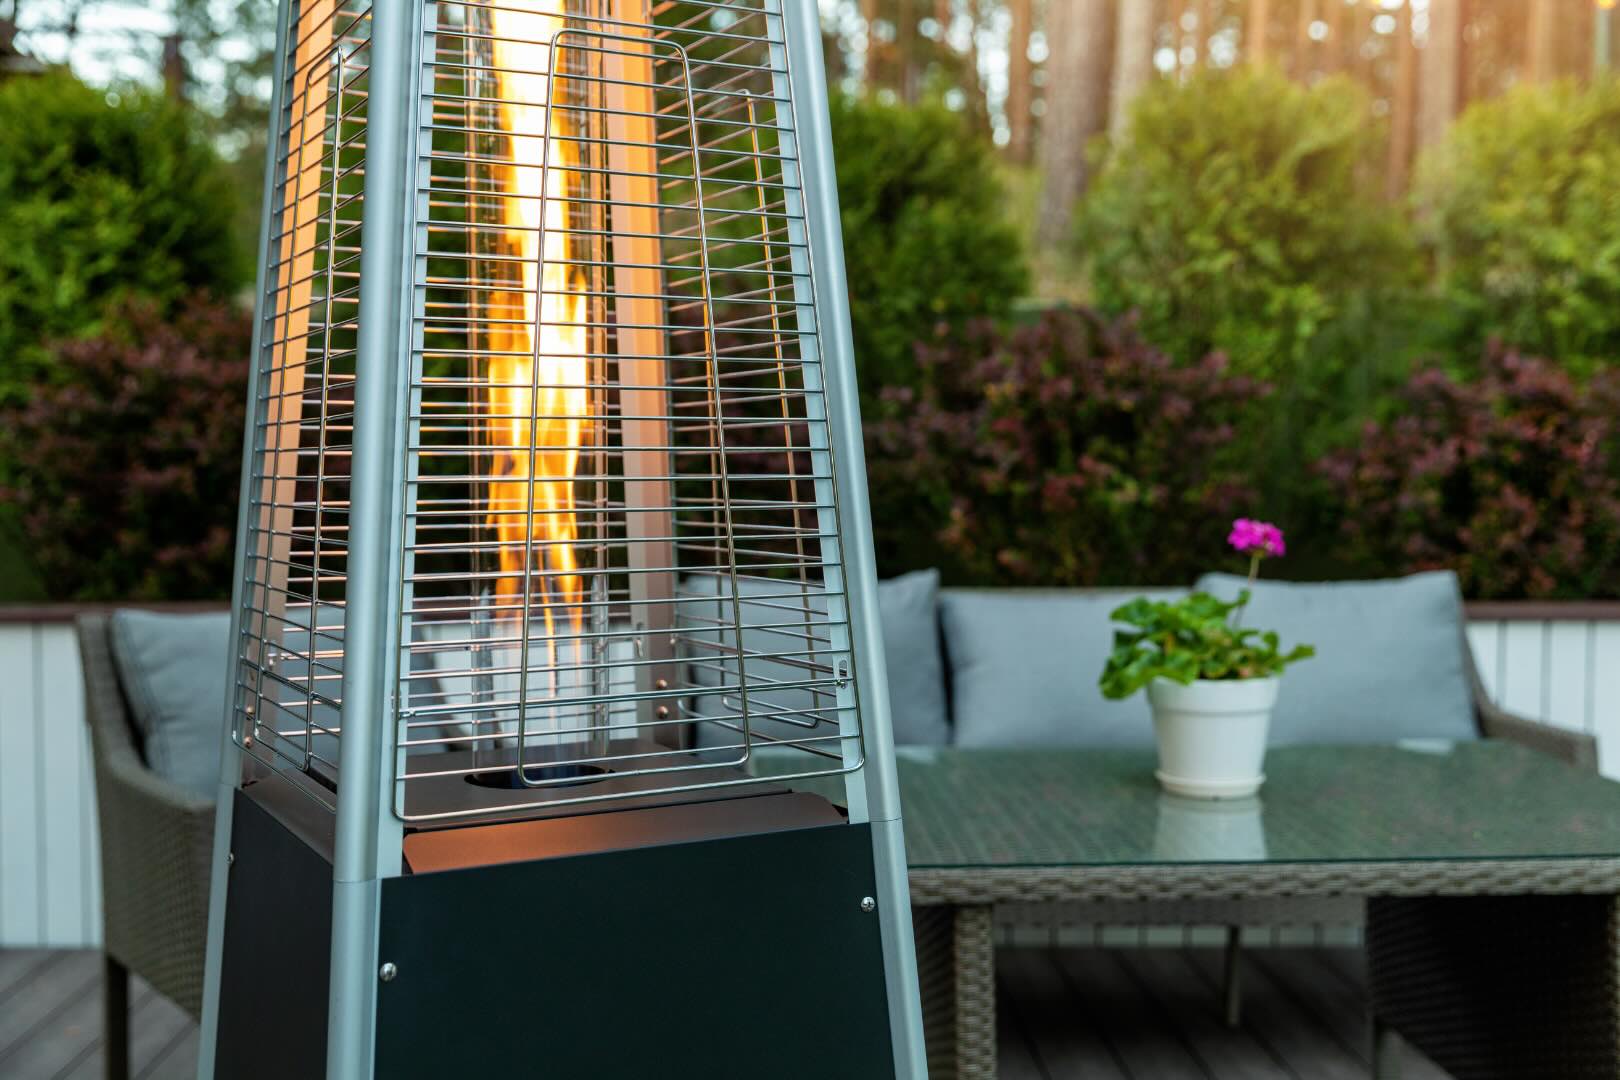 What Is The Best Outdoor Heater For A Patio